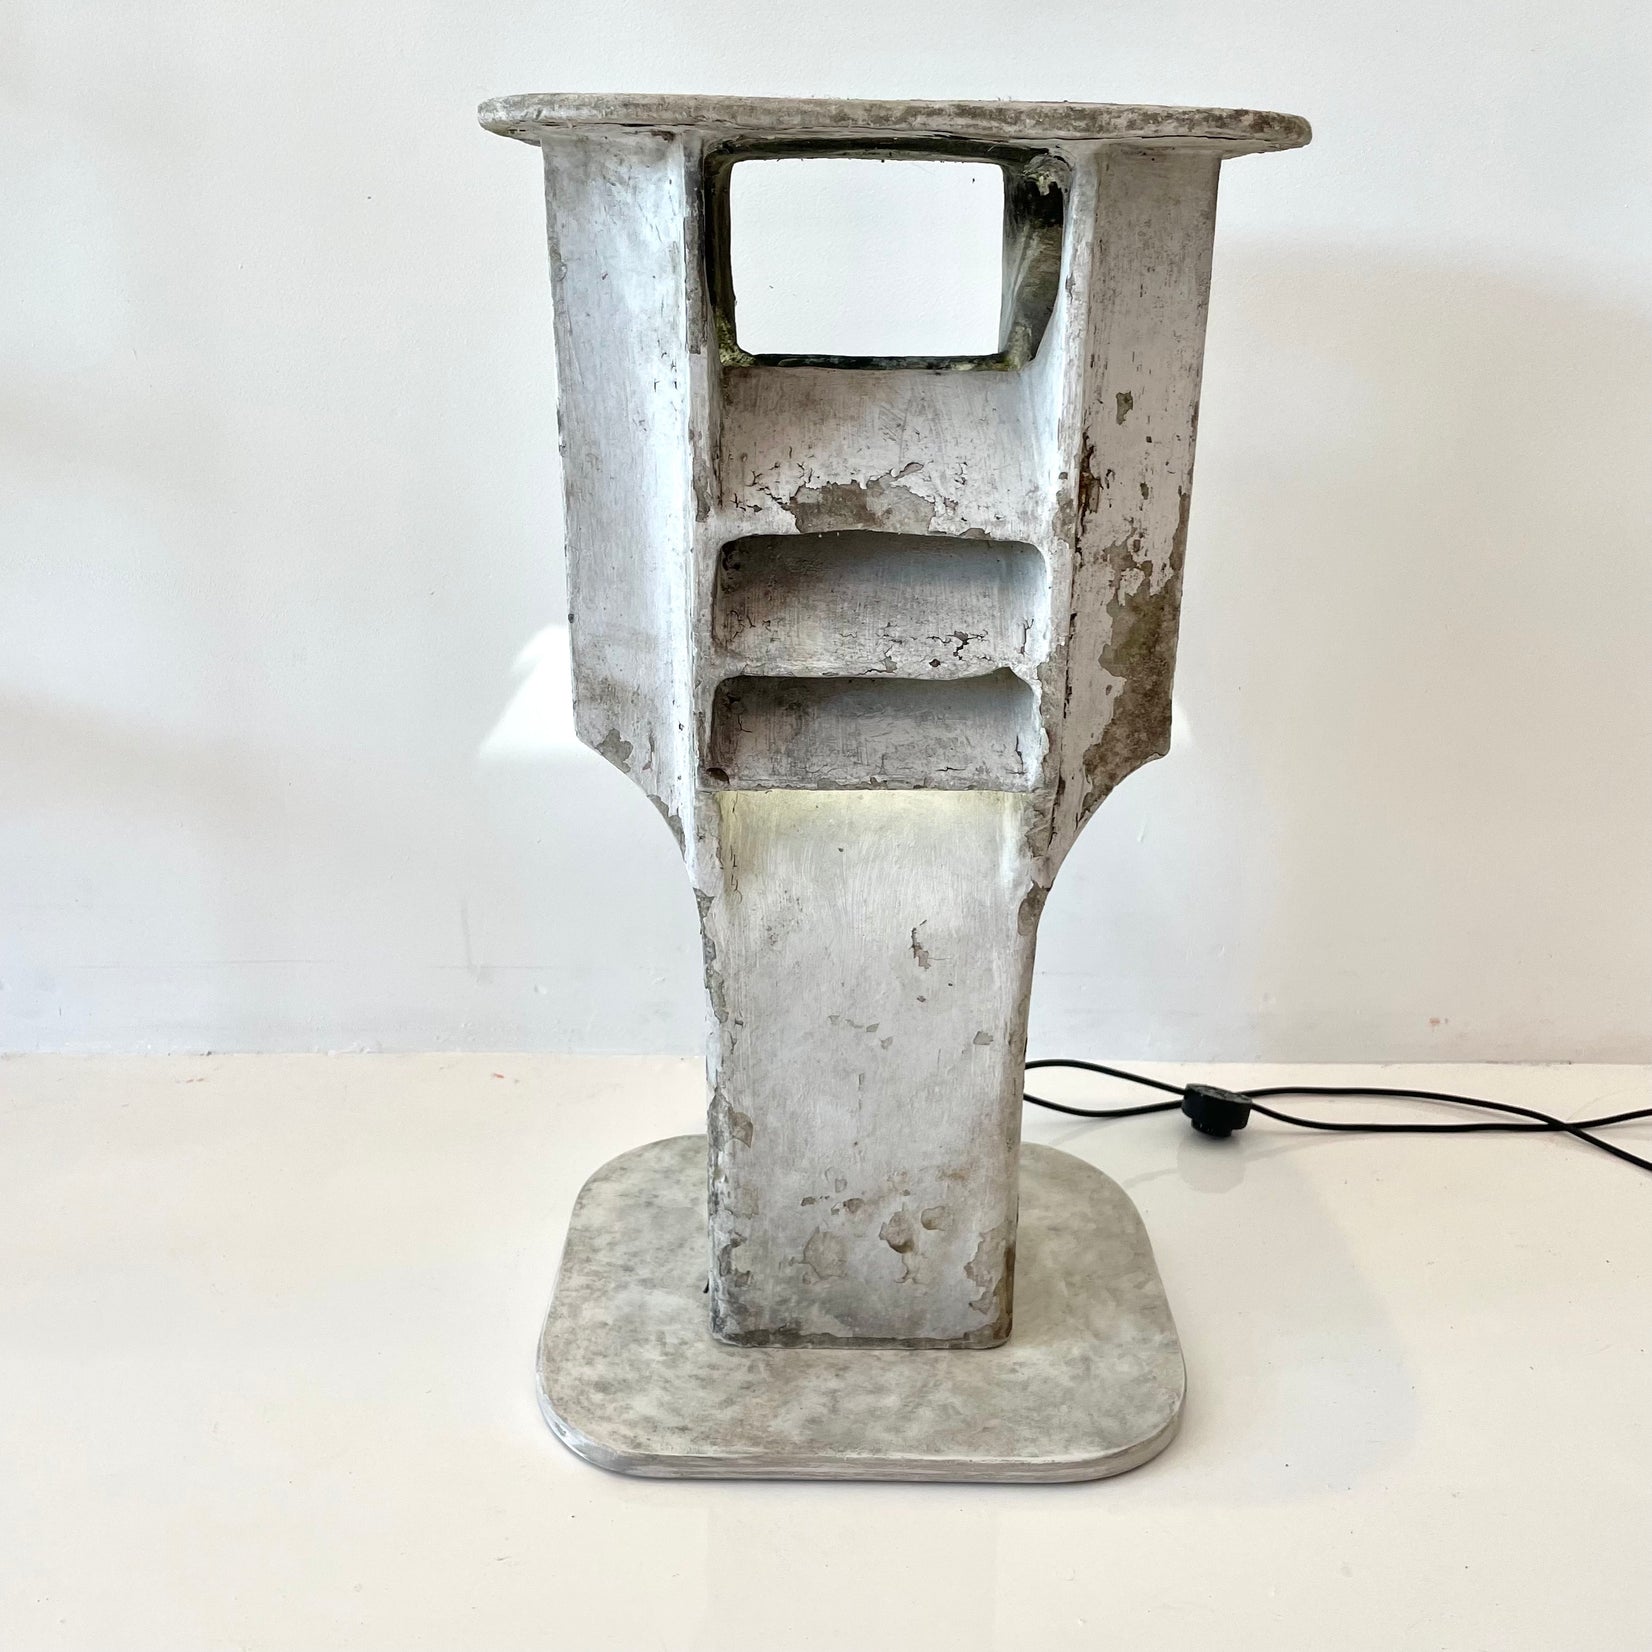 Willy Guhl Light Up Concrete Side Table, 1960s Switzerland